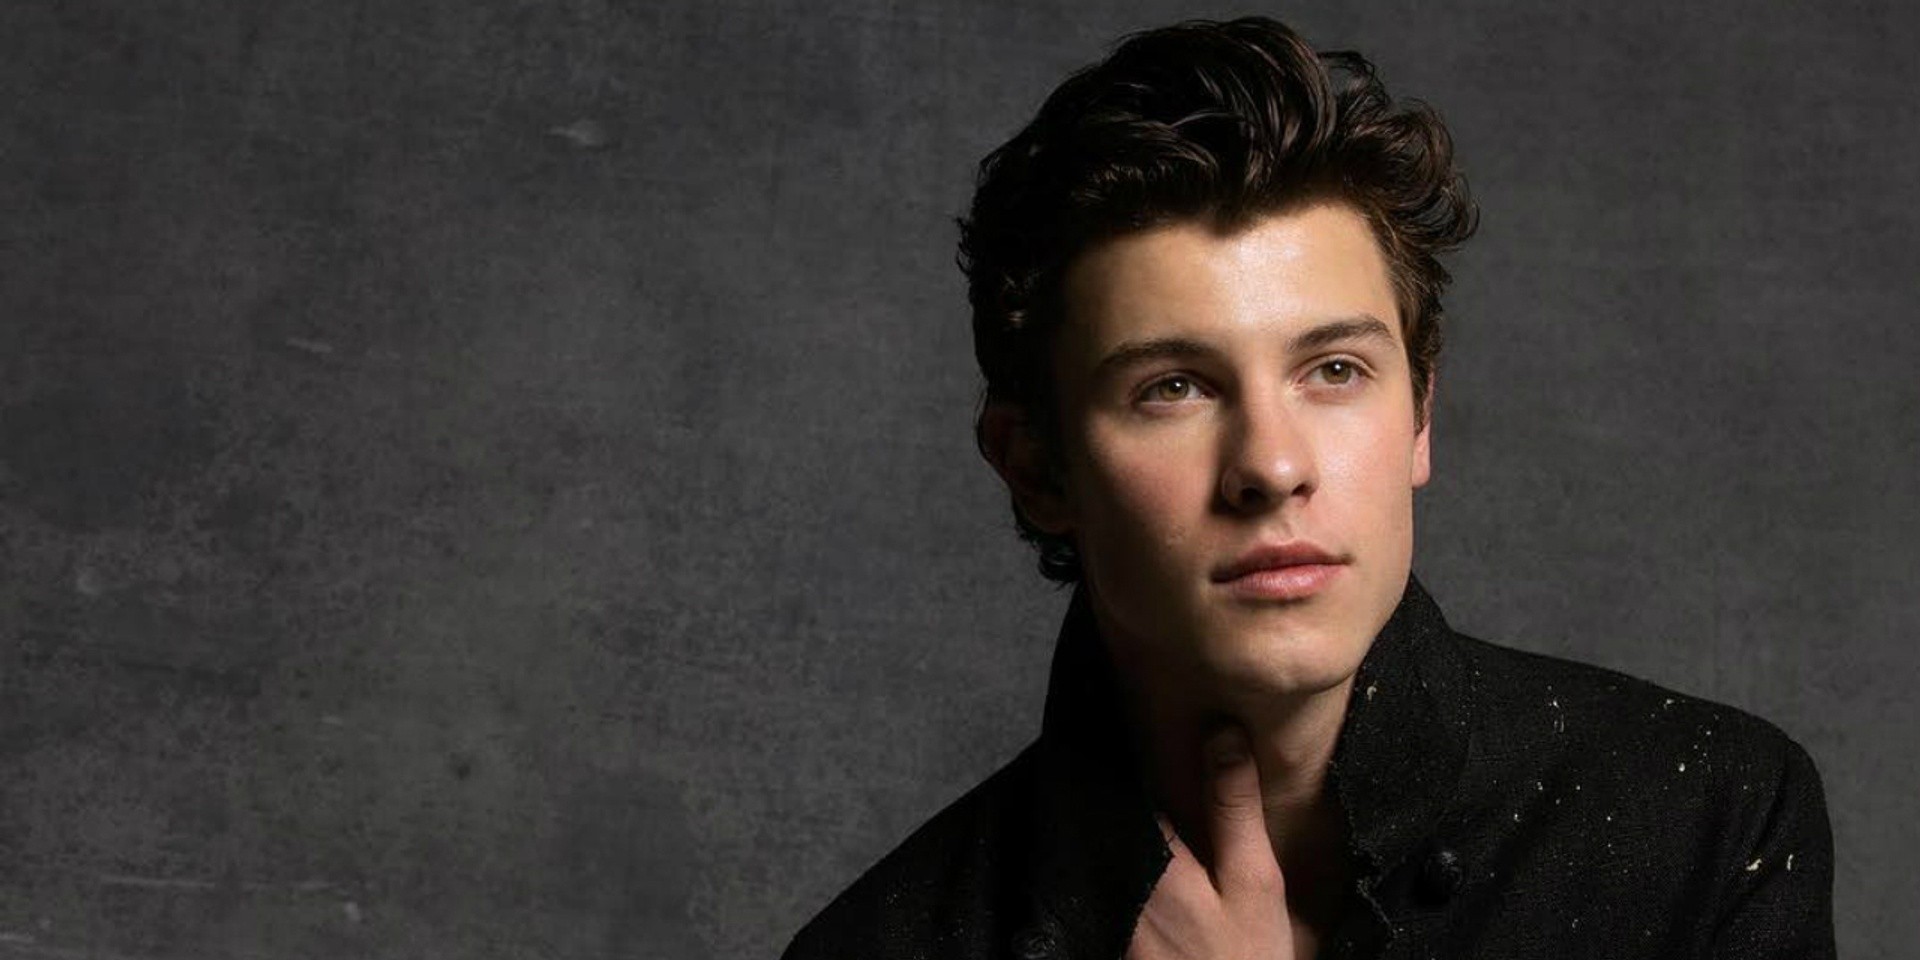 Shawn Mendes releases new single, 'If I Can't Have You' – listen